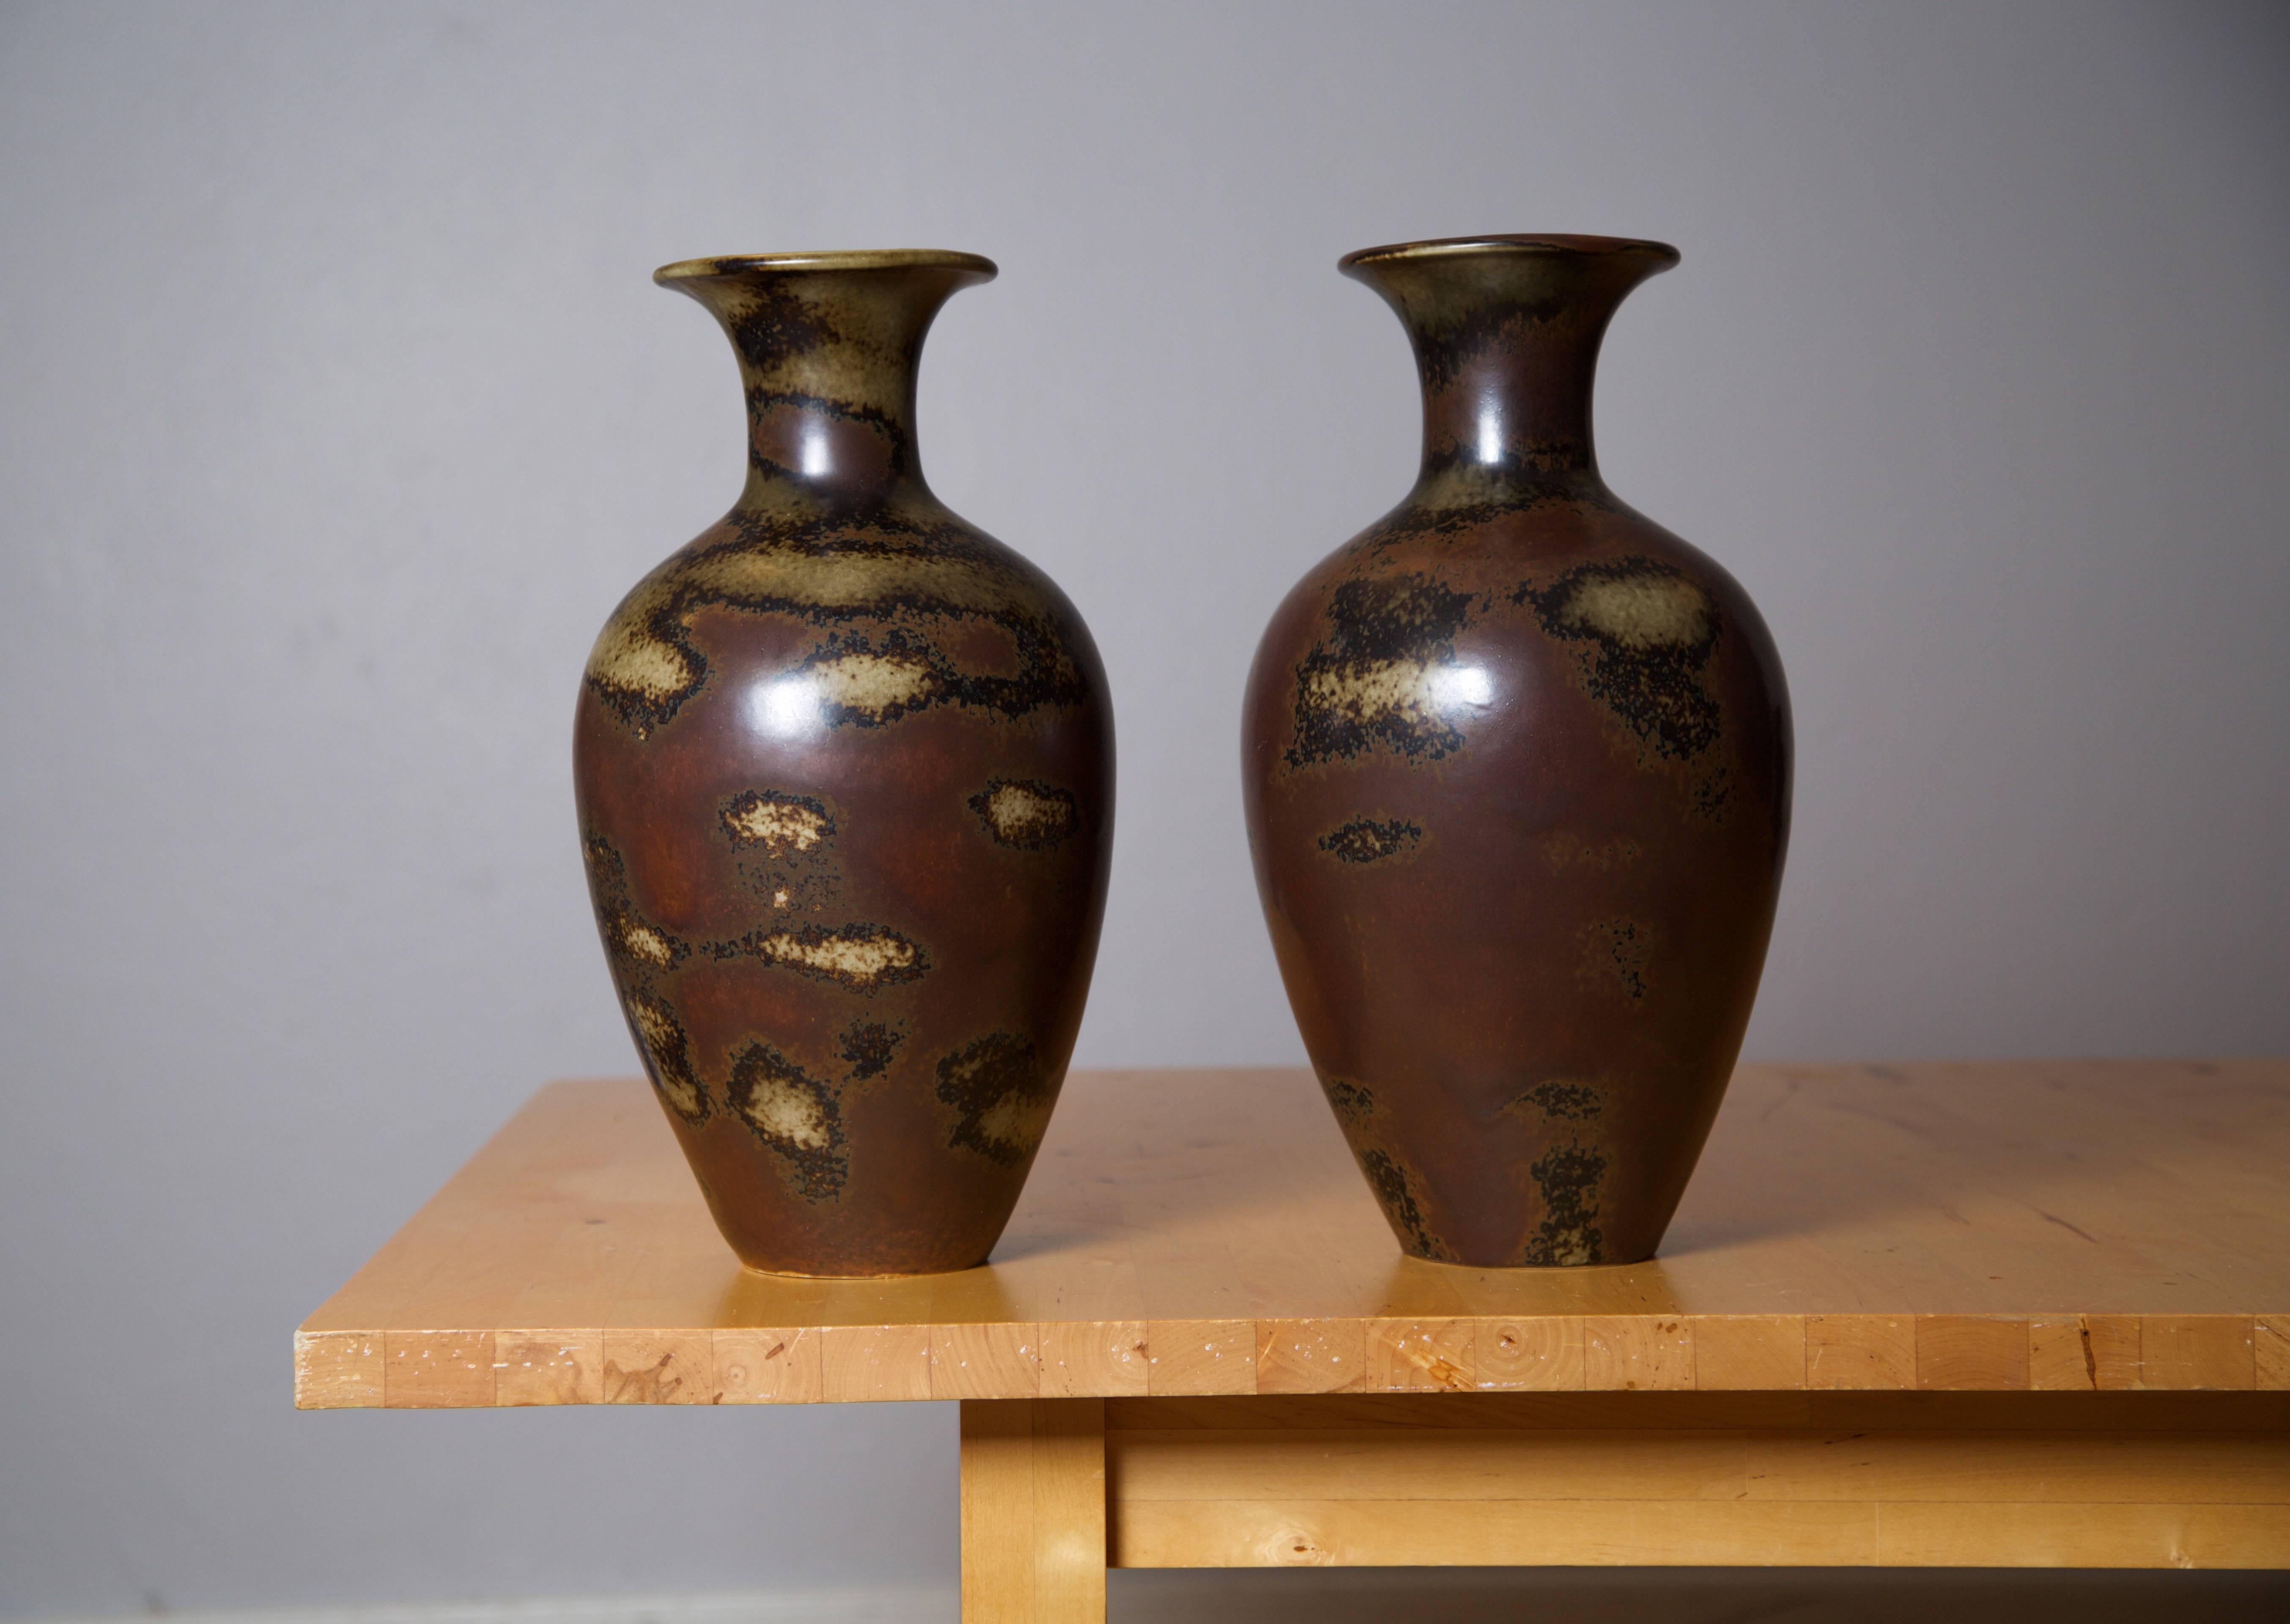 Pair of monumental floor vases by Swedish ceramist Gunnar Nylund. 

Handmade by Rörstrand Ab
Sweden, early 1950s

Stoneware with unusual and unique 